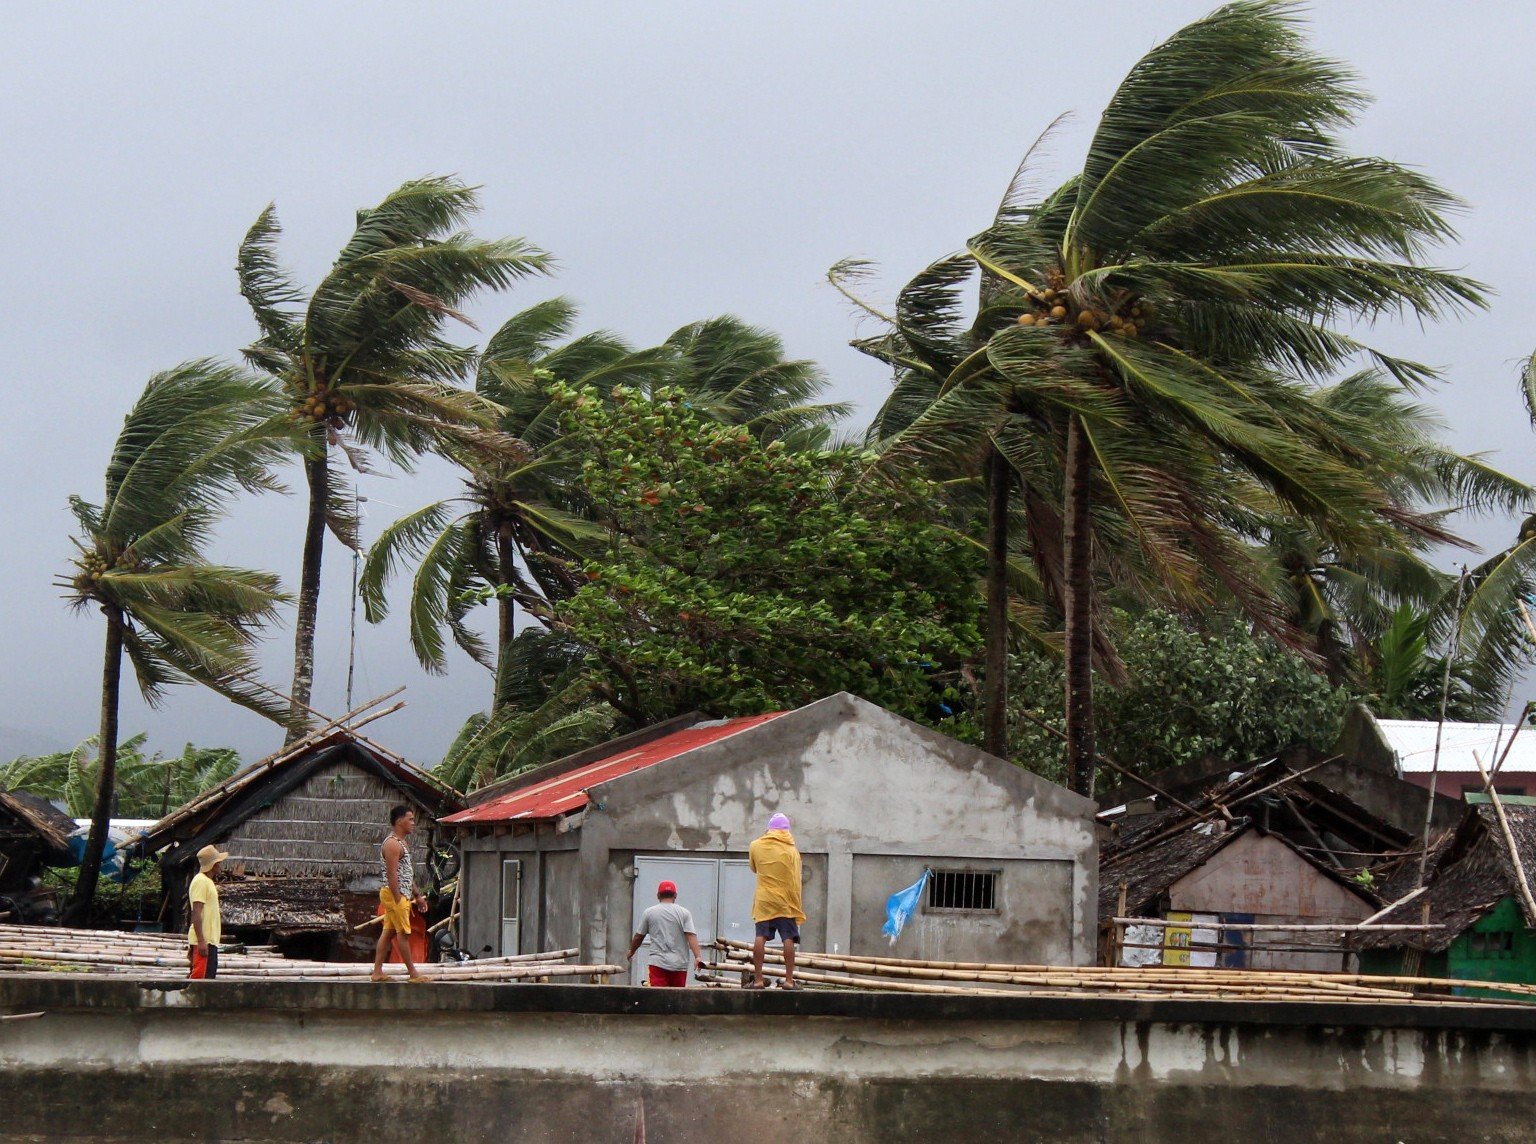 Villagers look on as strong winds blow trees next to houses in the town of Calabanga, Camarines sur province, Philippines, ahead of Typhoon Kammuri. Photo: EPA-EFE